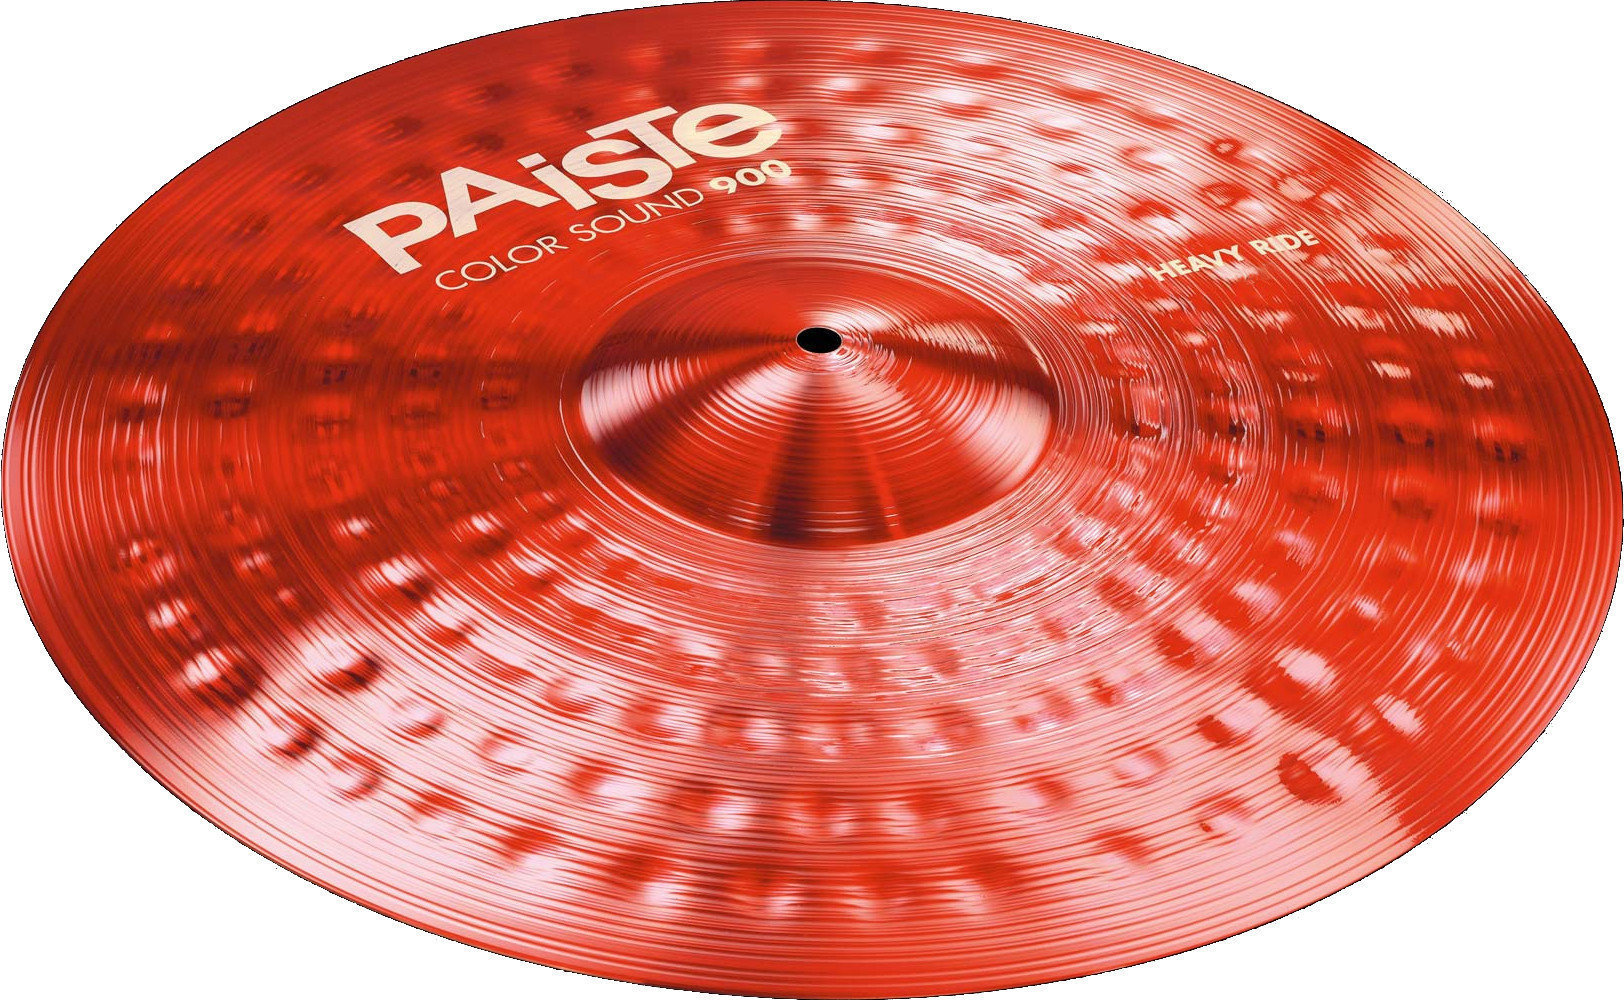 Ride Cymbal Paiste Color Sound 900  Heavy Ride Cymbal 22" Red